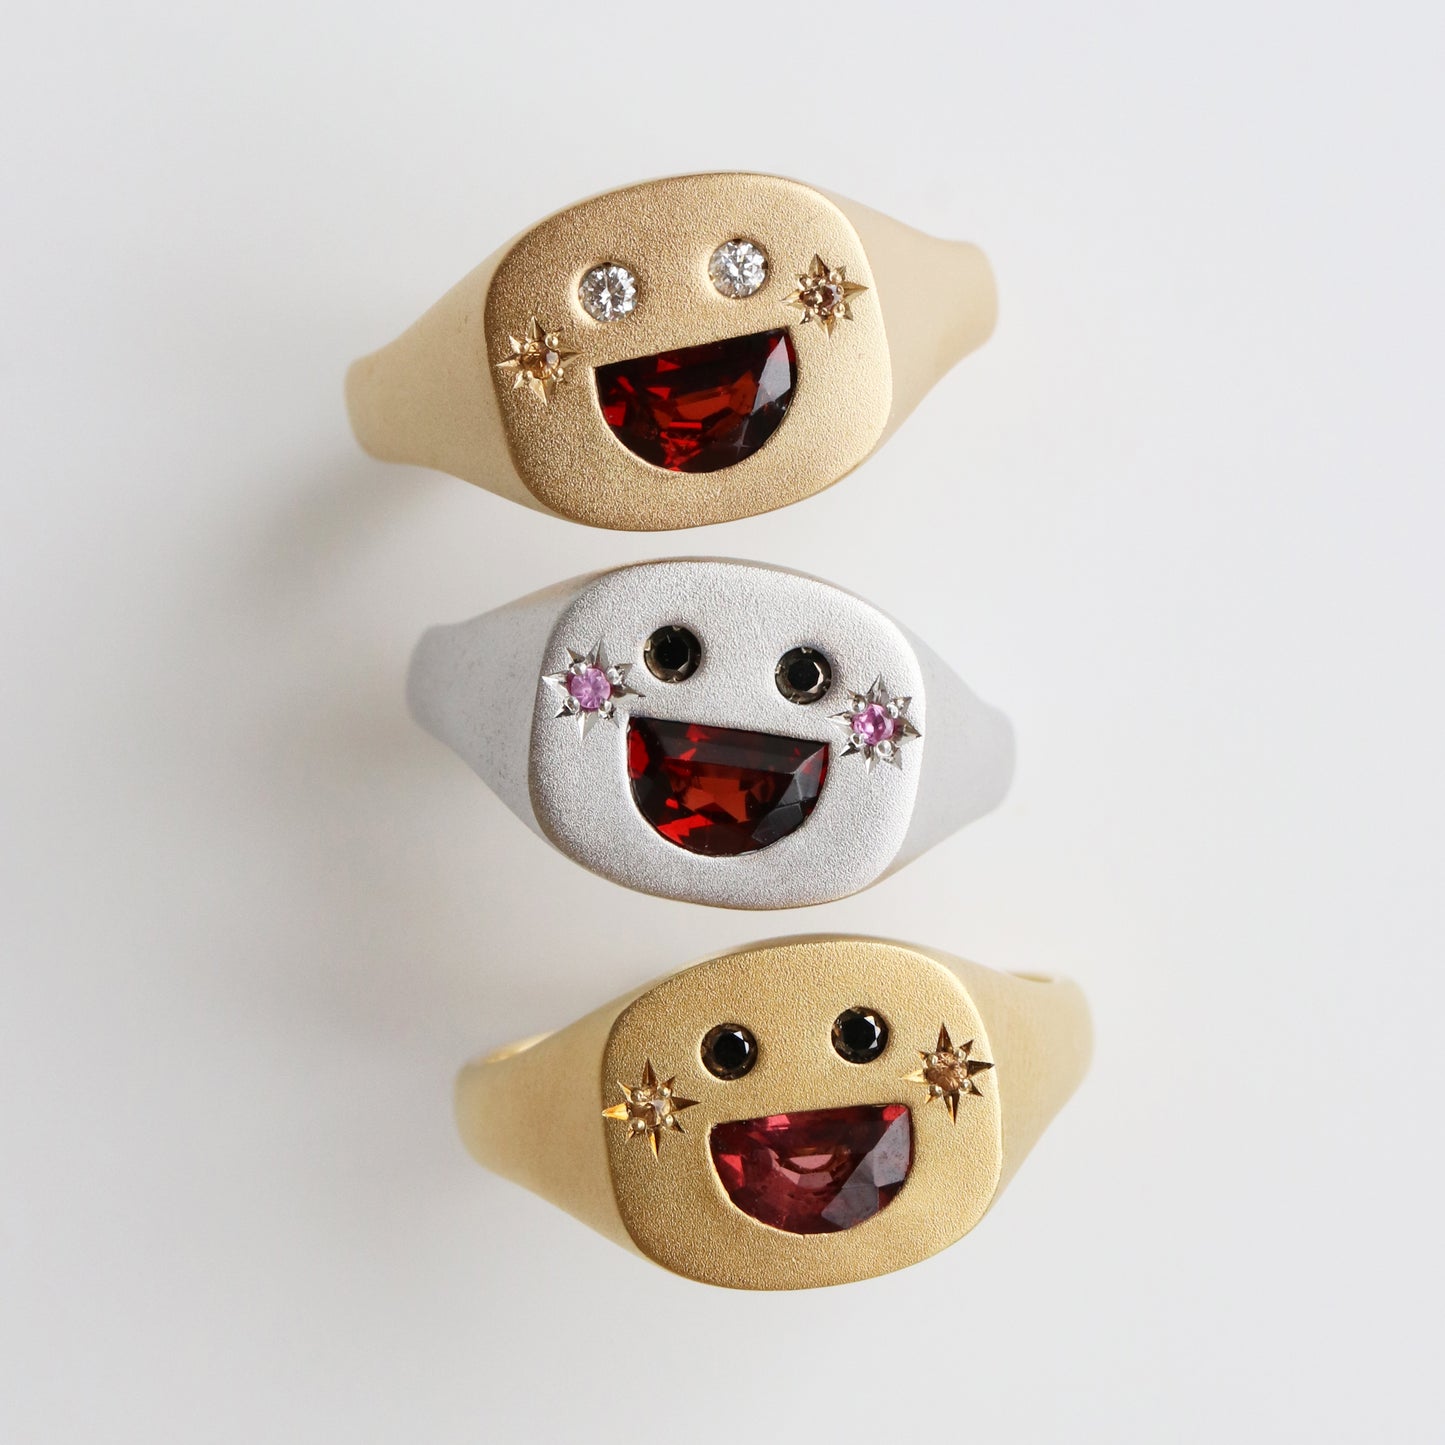 BIG SMILE SIGNET RING with CHEEKS